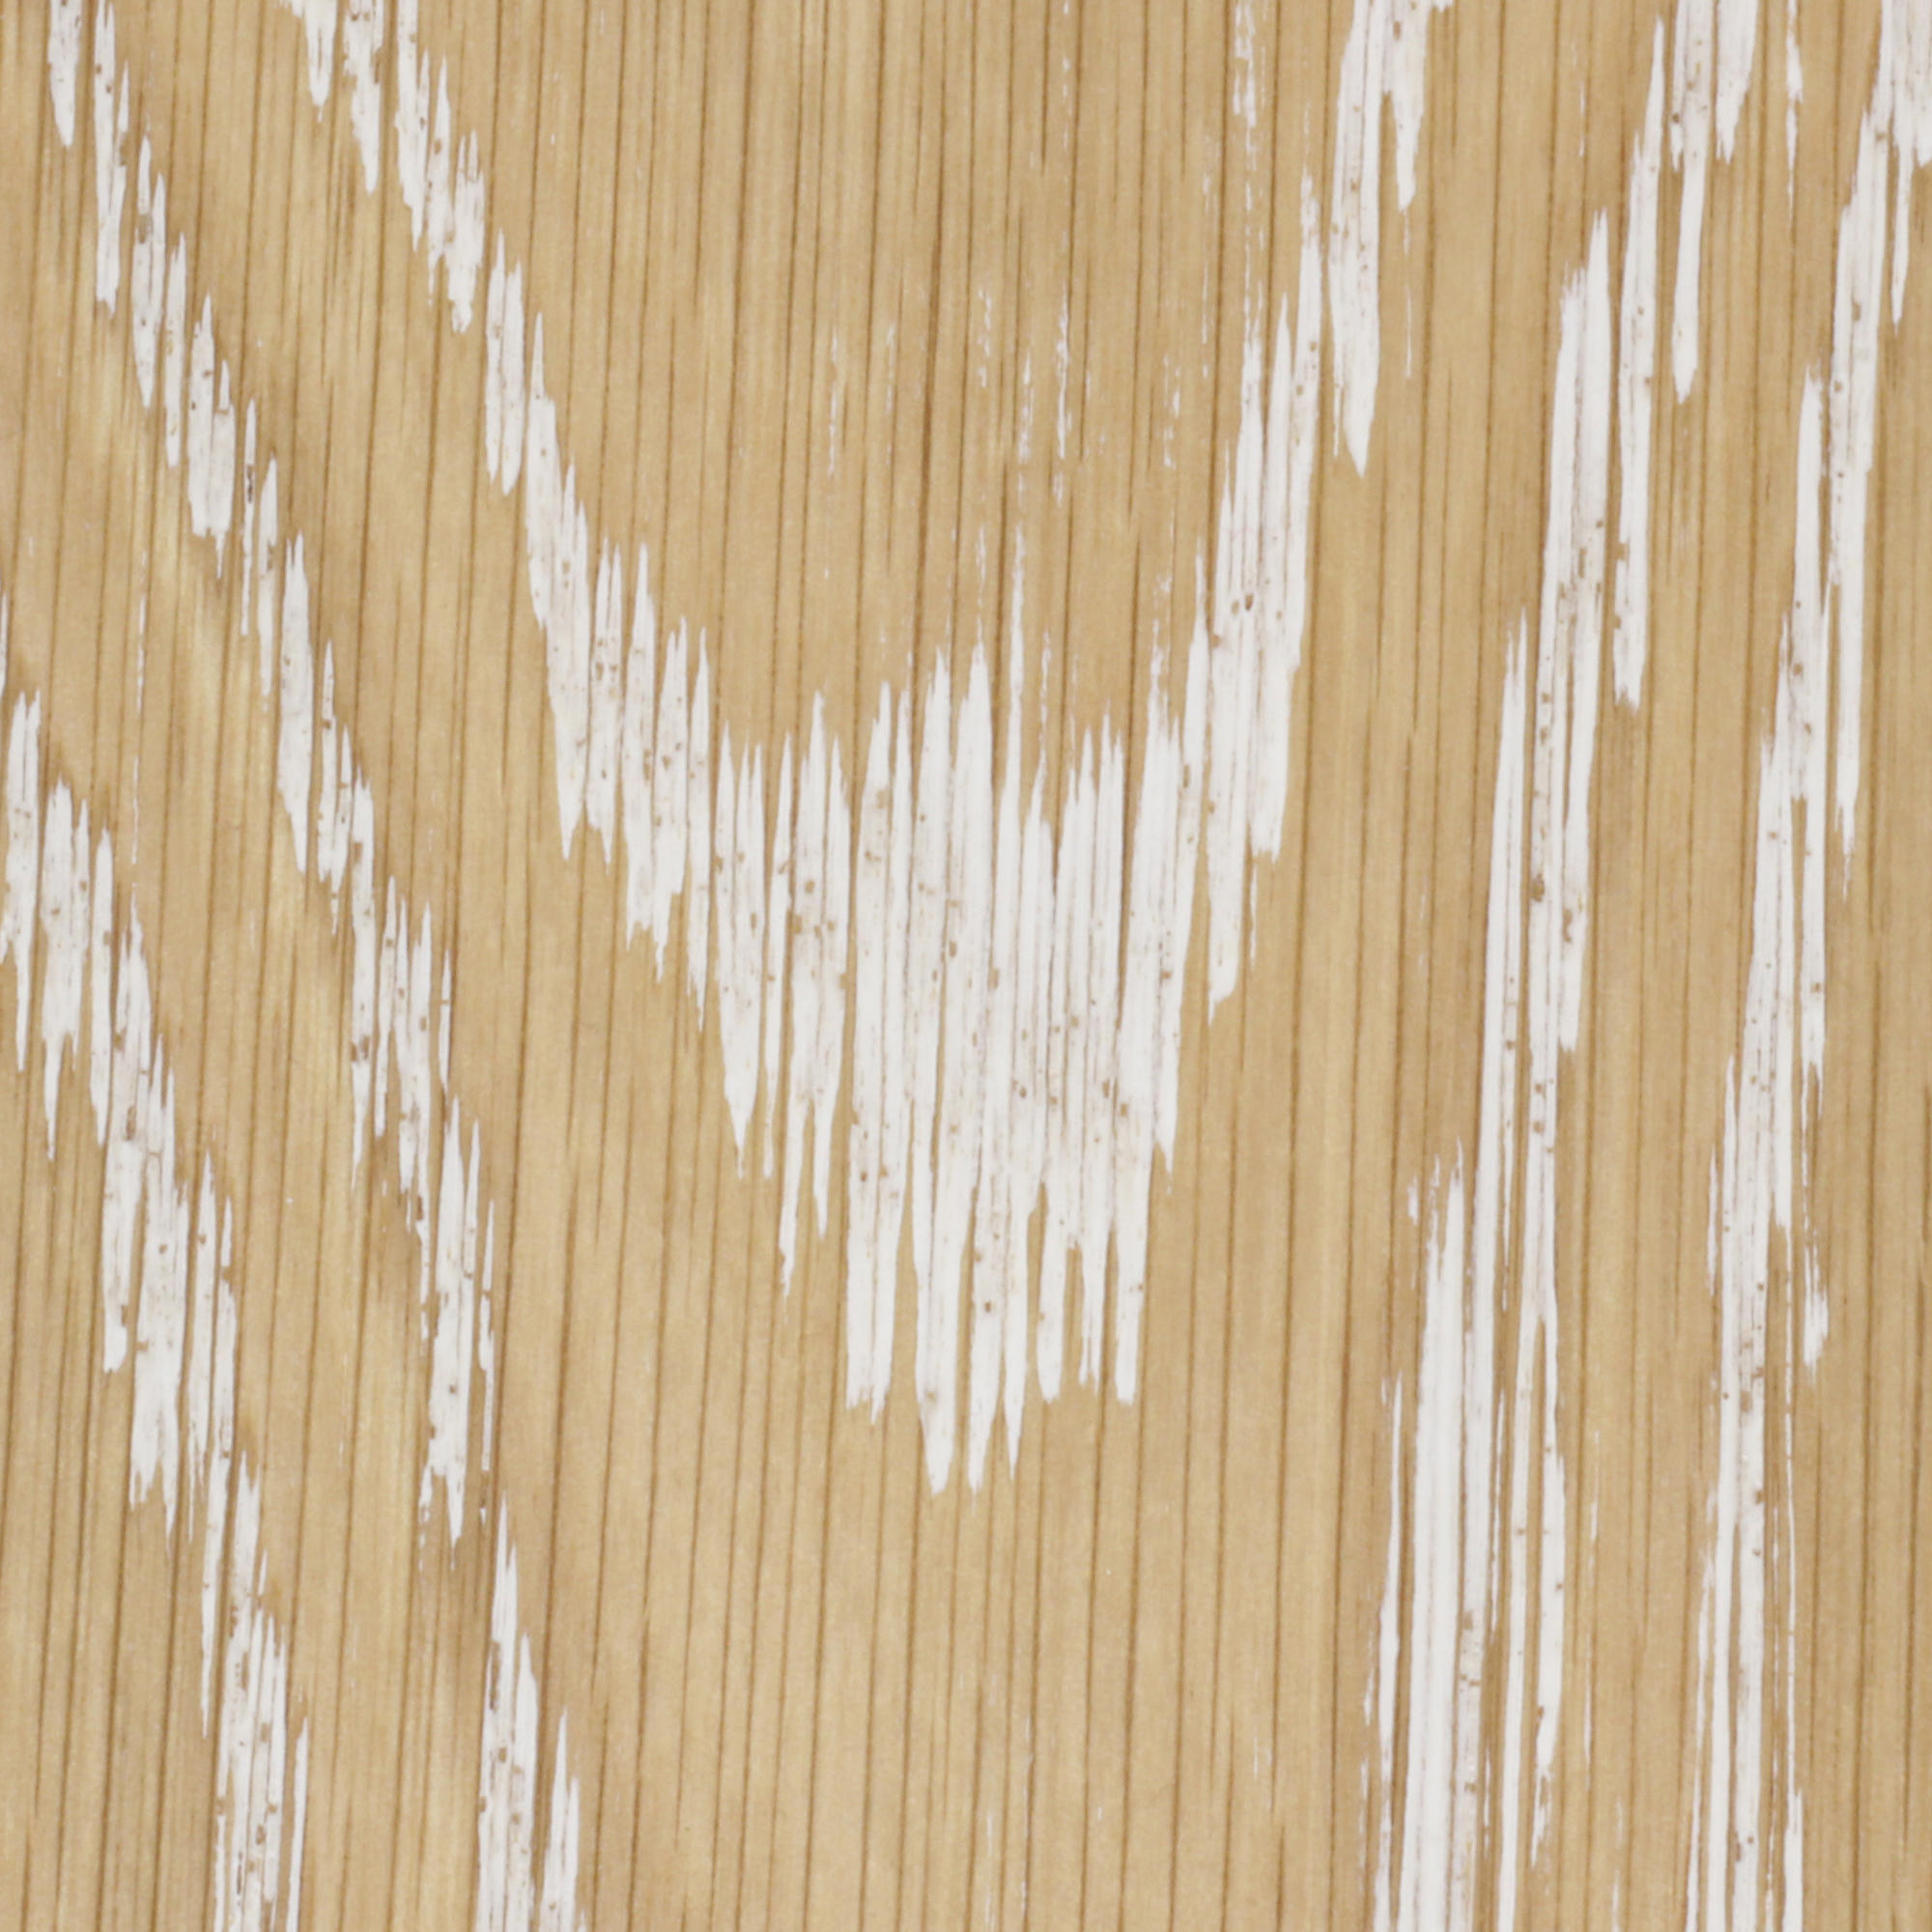 Pigmented Brushed Solid Oak Flooring Architonic